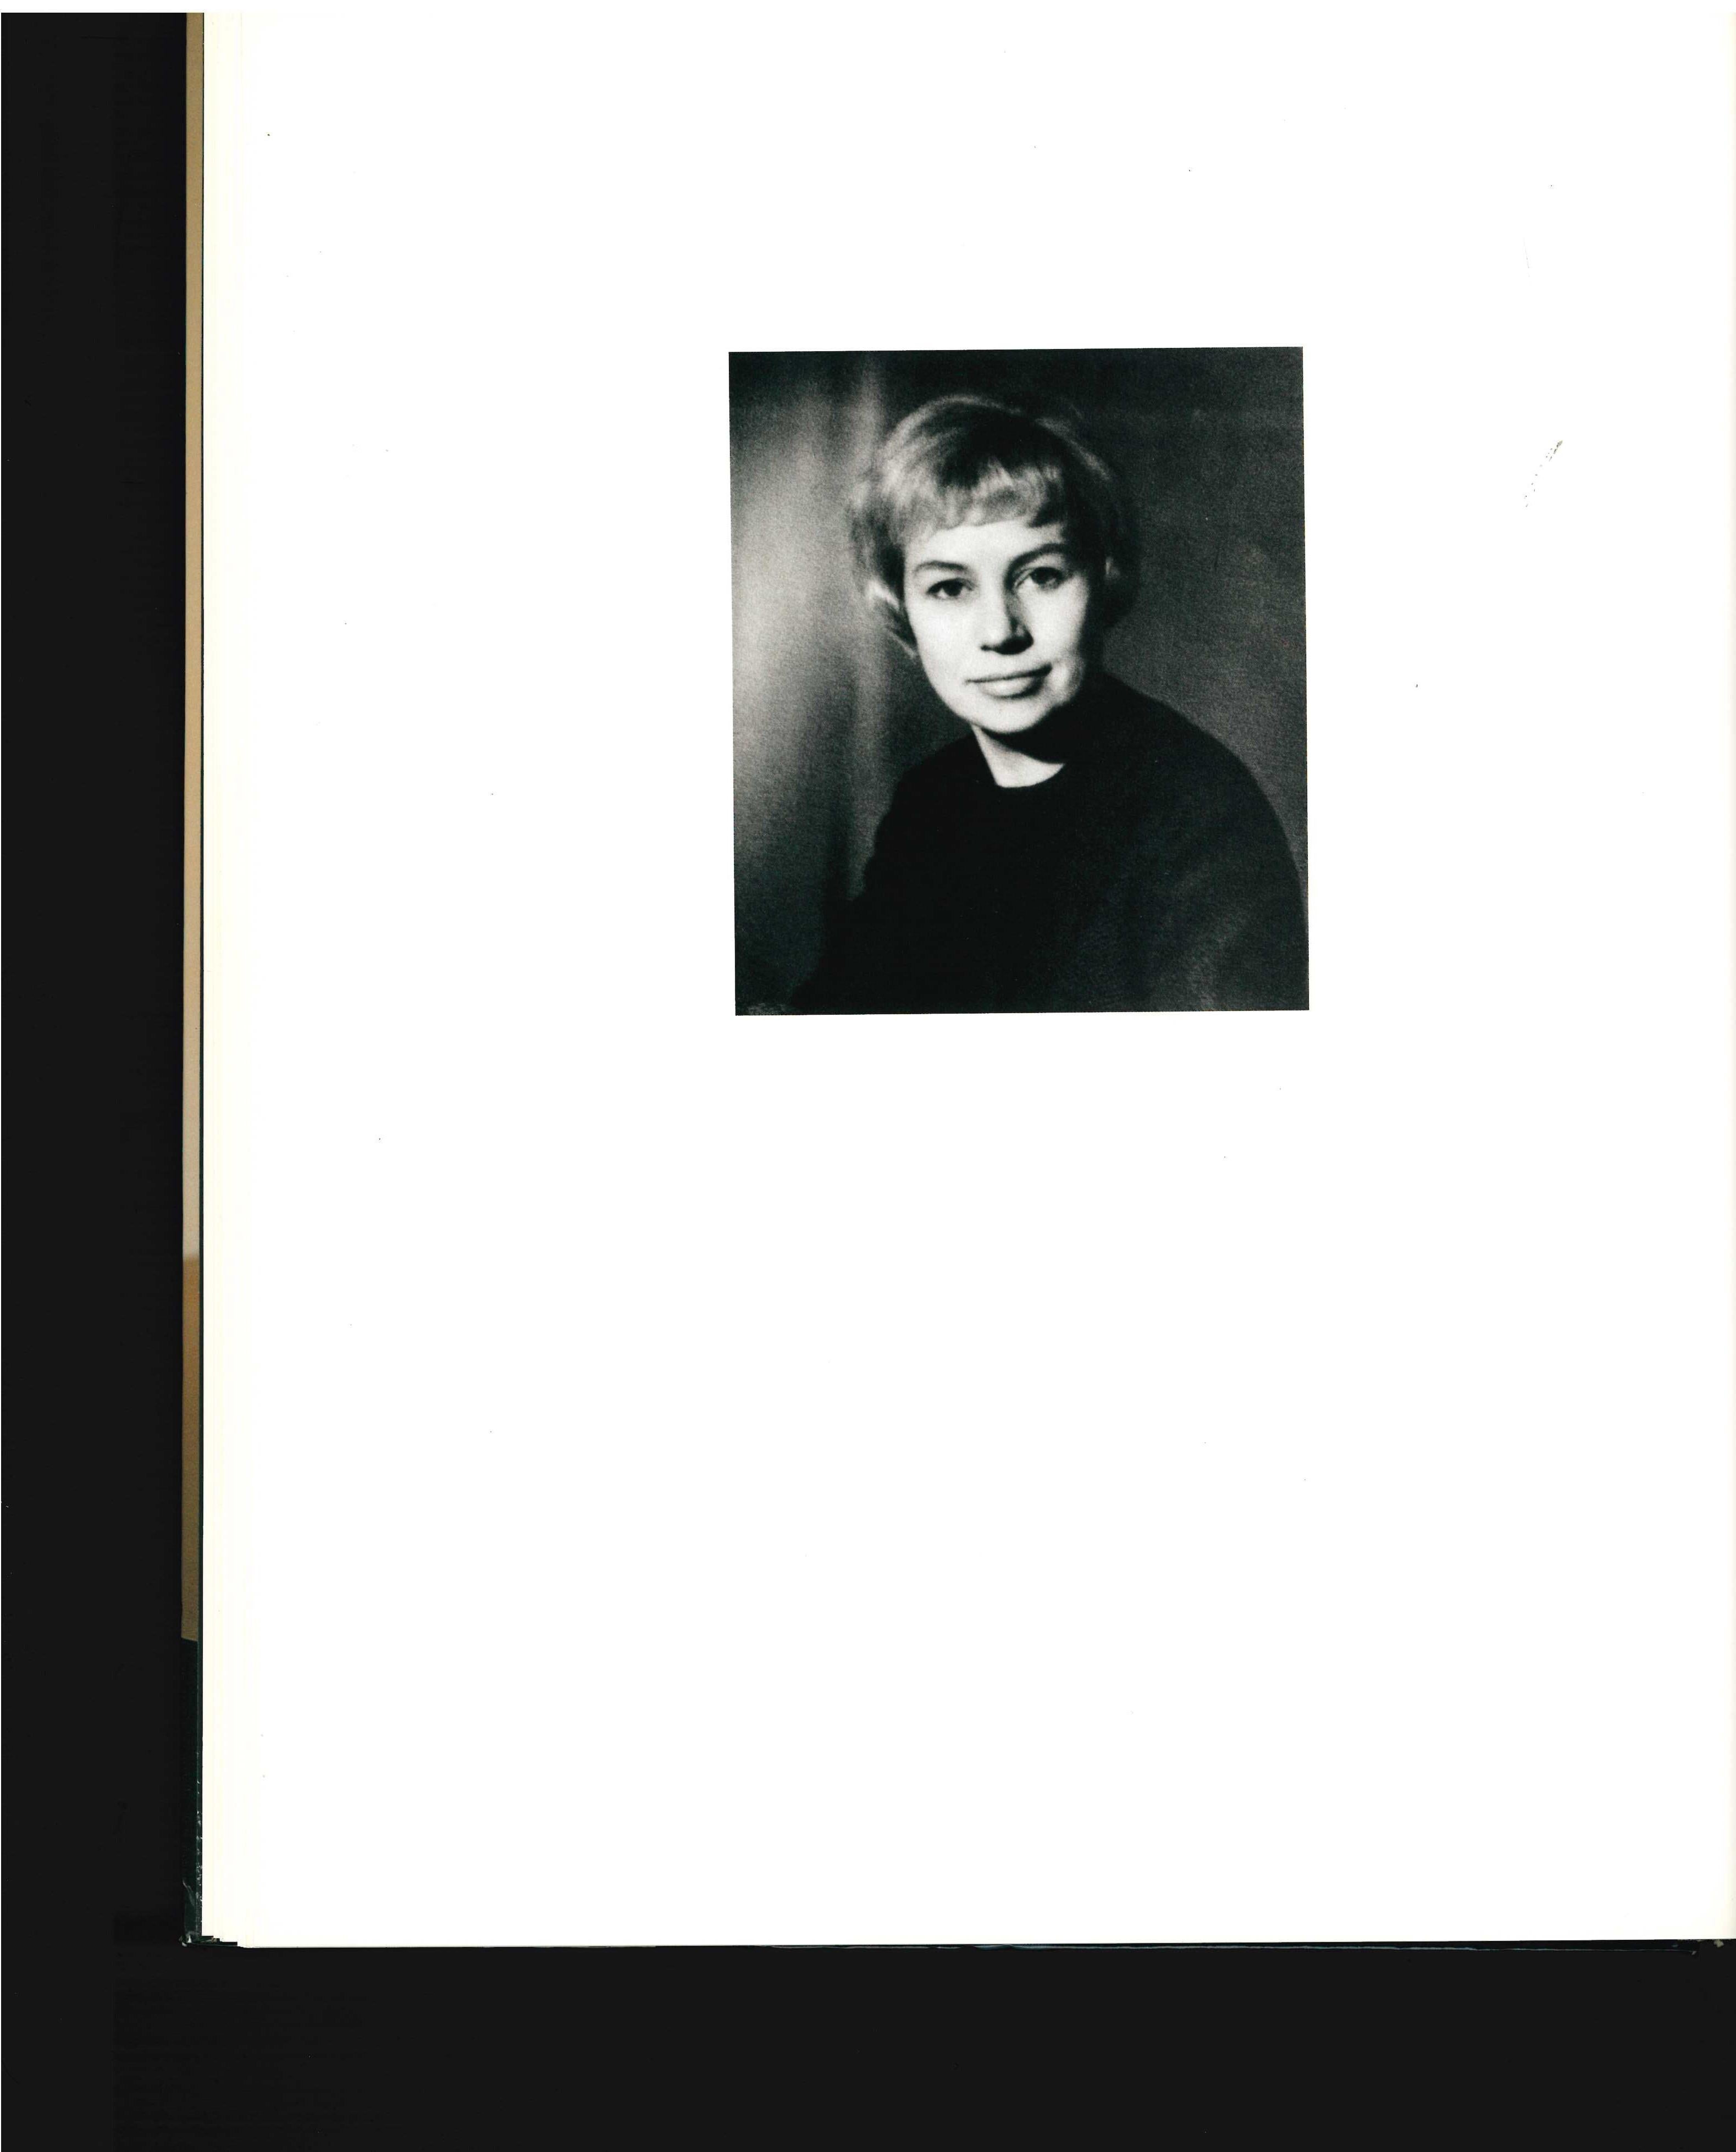 A hardback book published in 1998, which looks at the life and work of Nanna Ditzel, a much sought after Danish Furniture designer of the second half of the 20th century. She studied at The Danish School of Arts & Crafts and The Royal Danish Academy